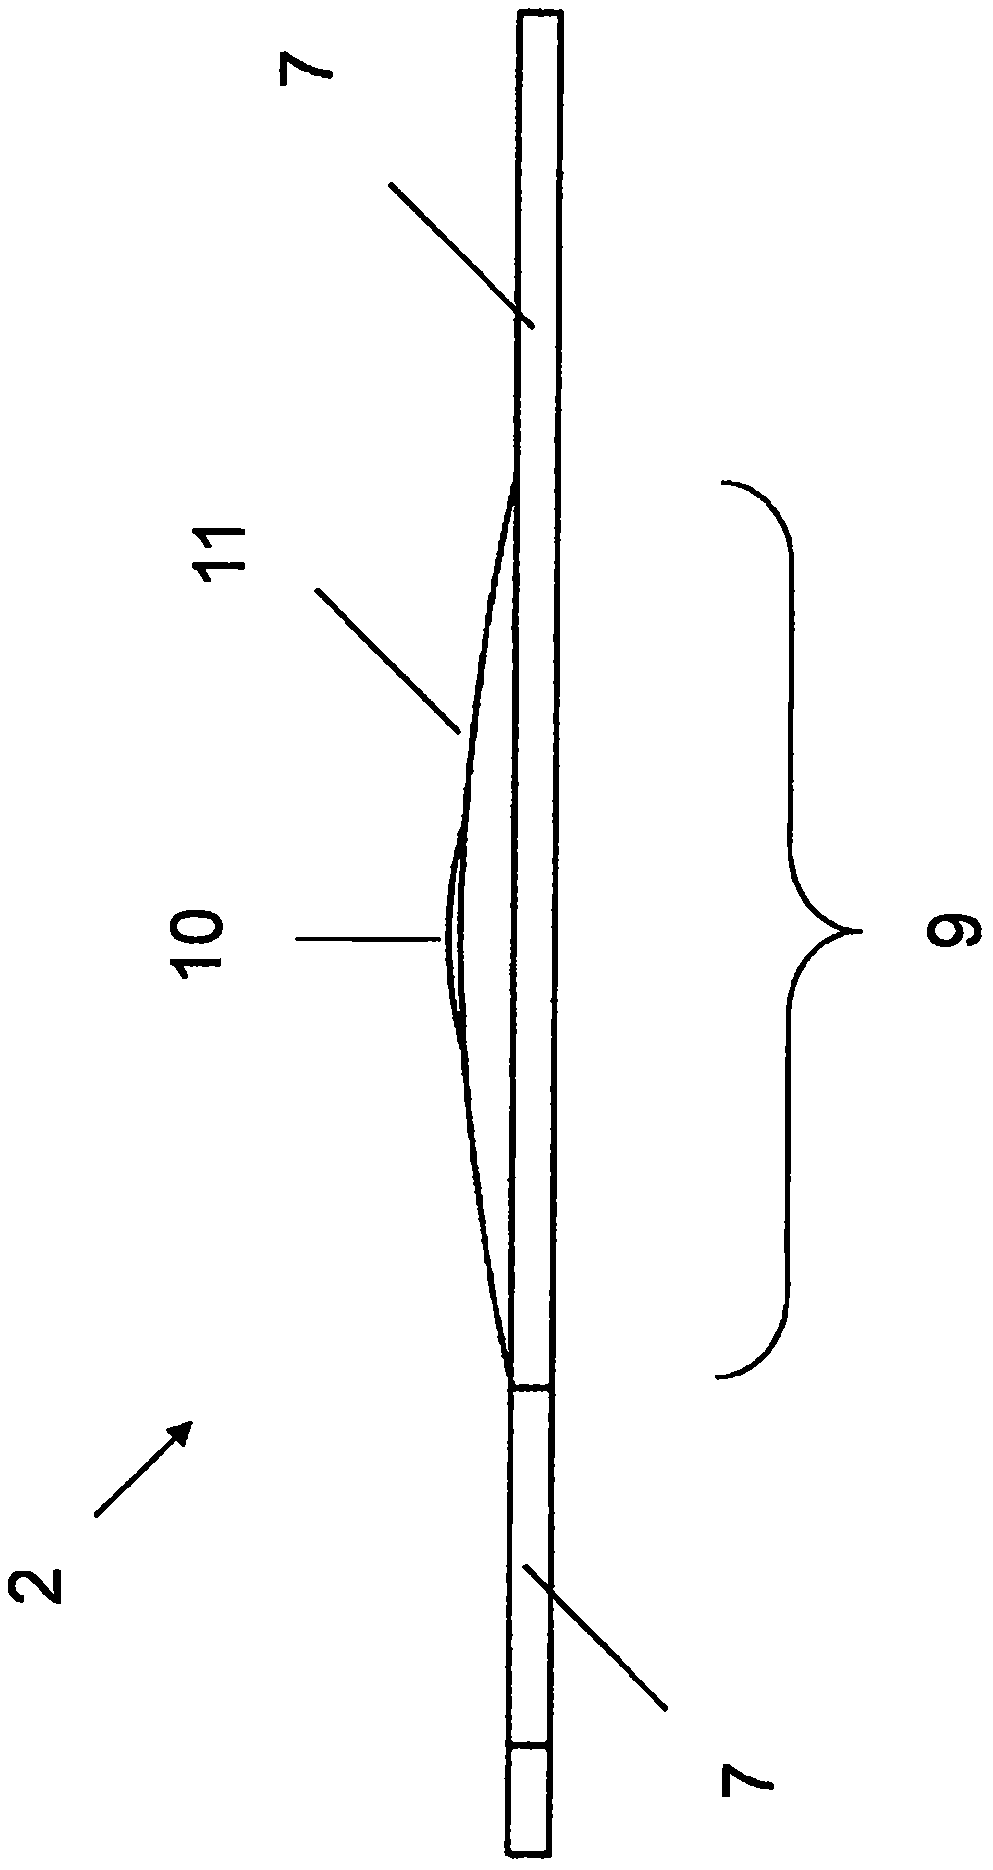 Two-stage intraocular lens with magnifying coaxial optic